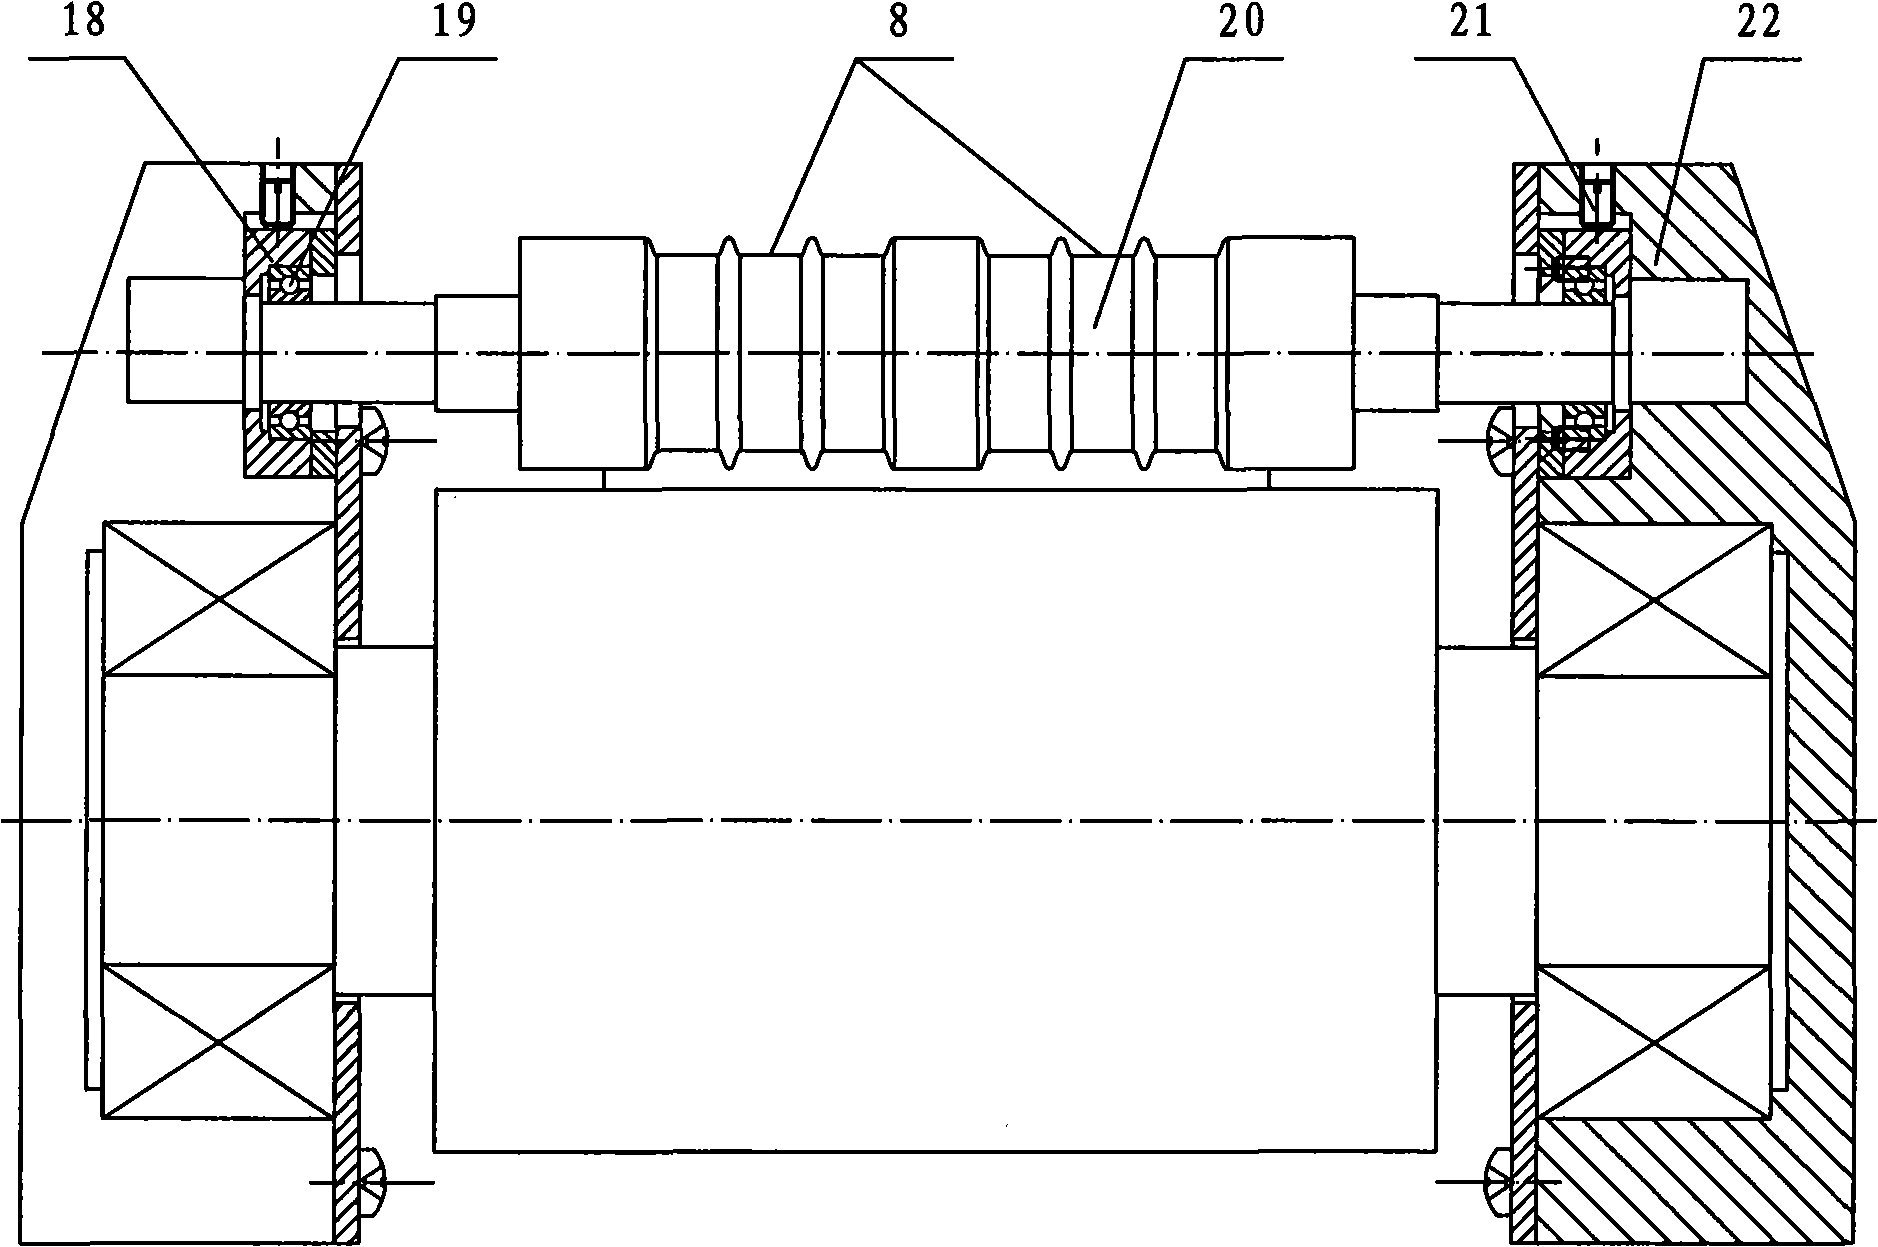 Lift traction device